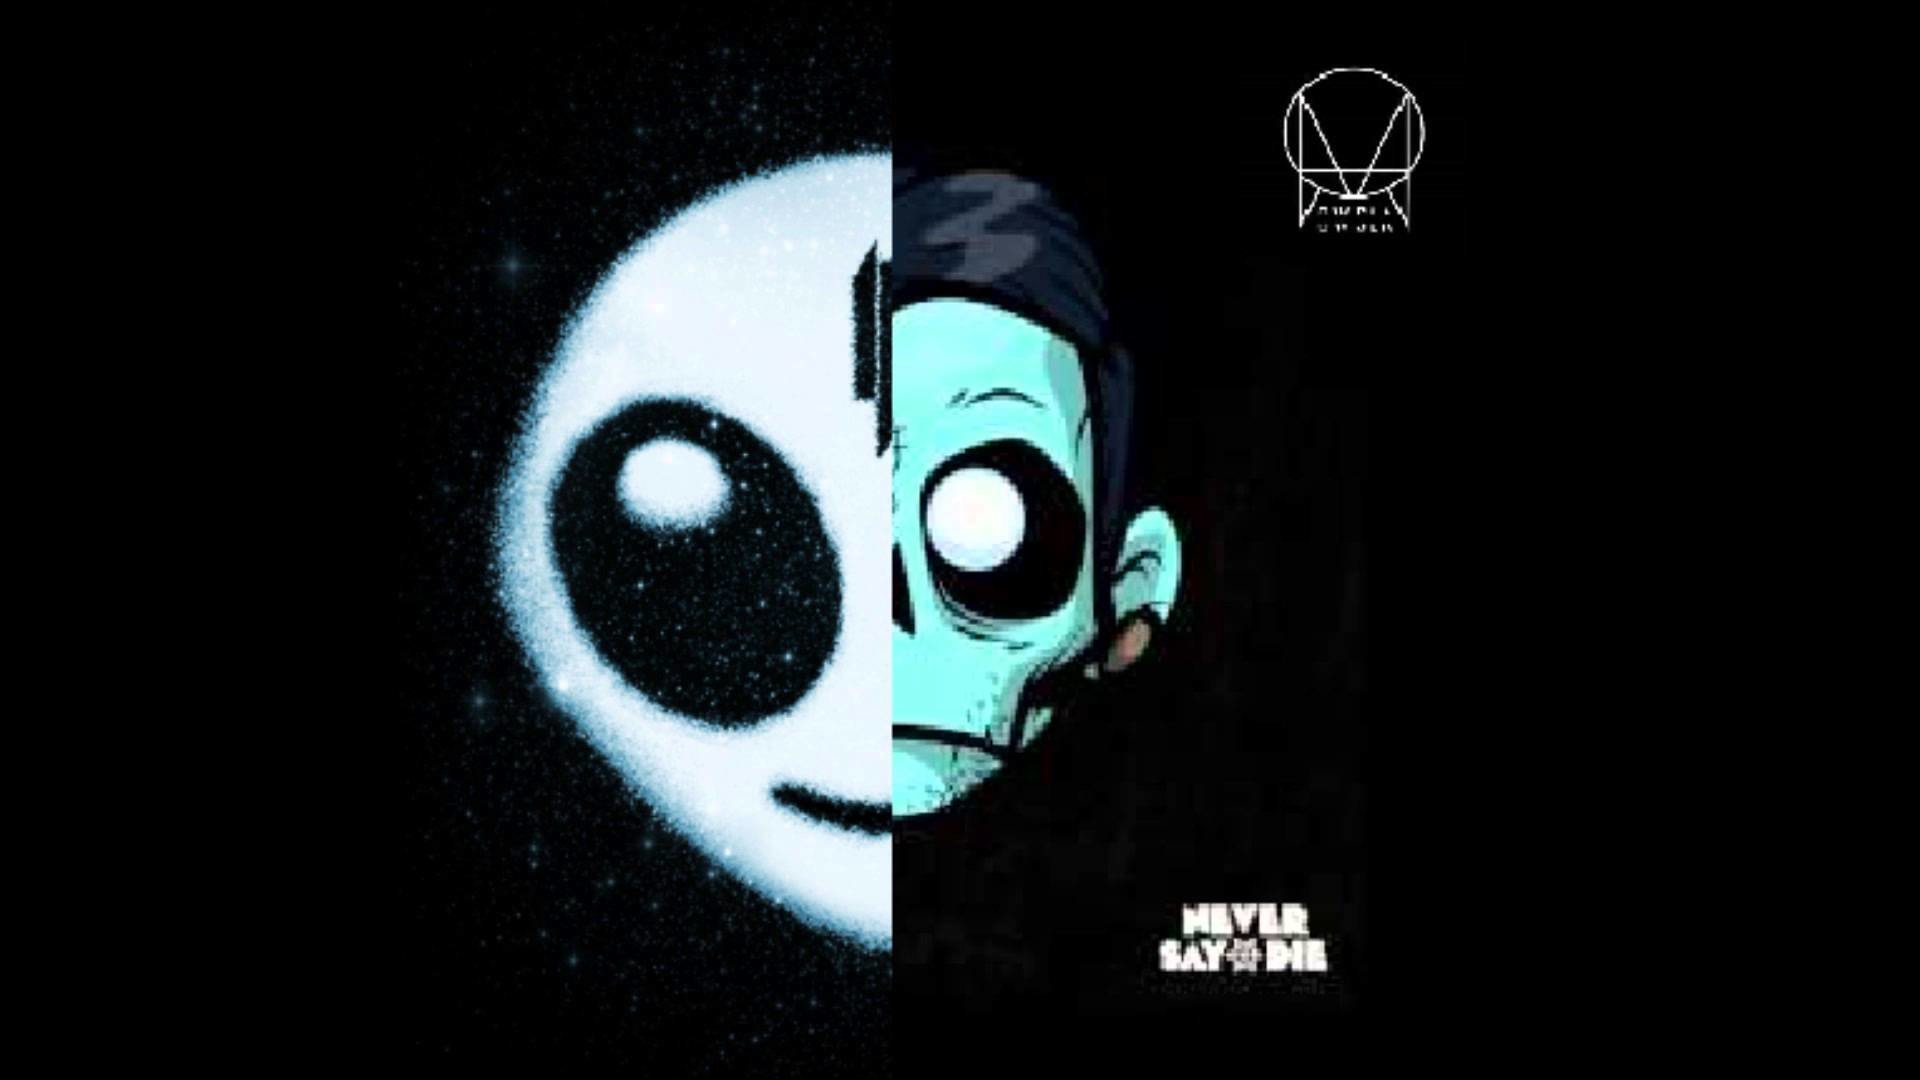 1920x1080 Zomboy skrillex all is fair in love and brostep terror squad boomyk mashup